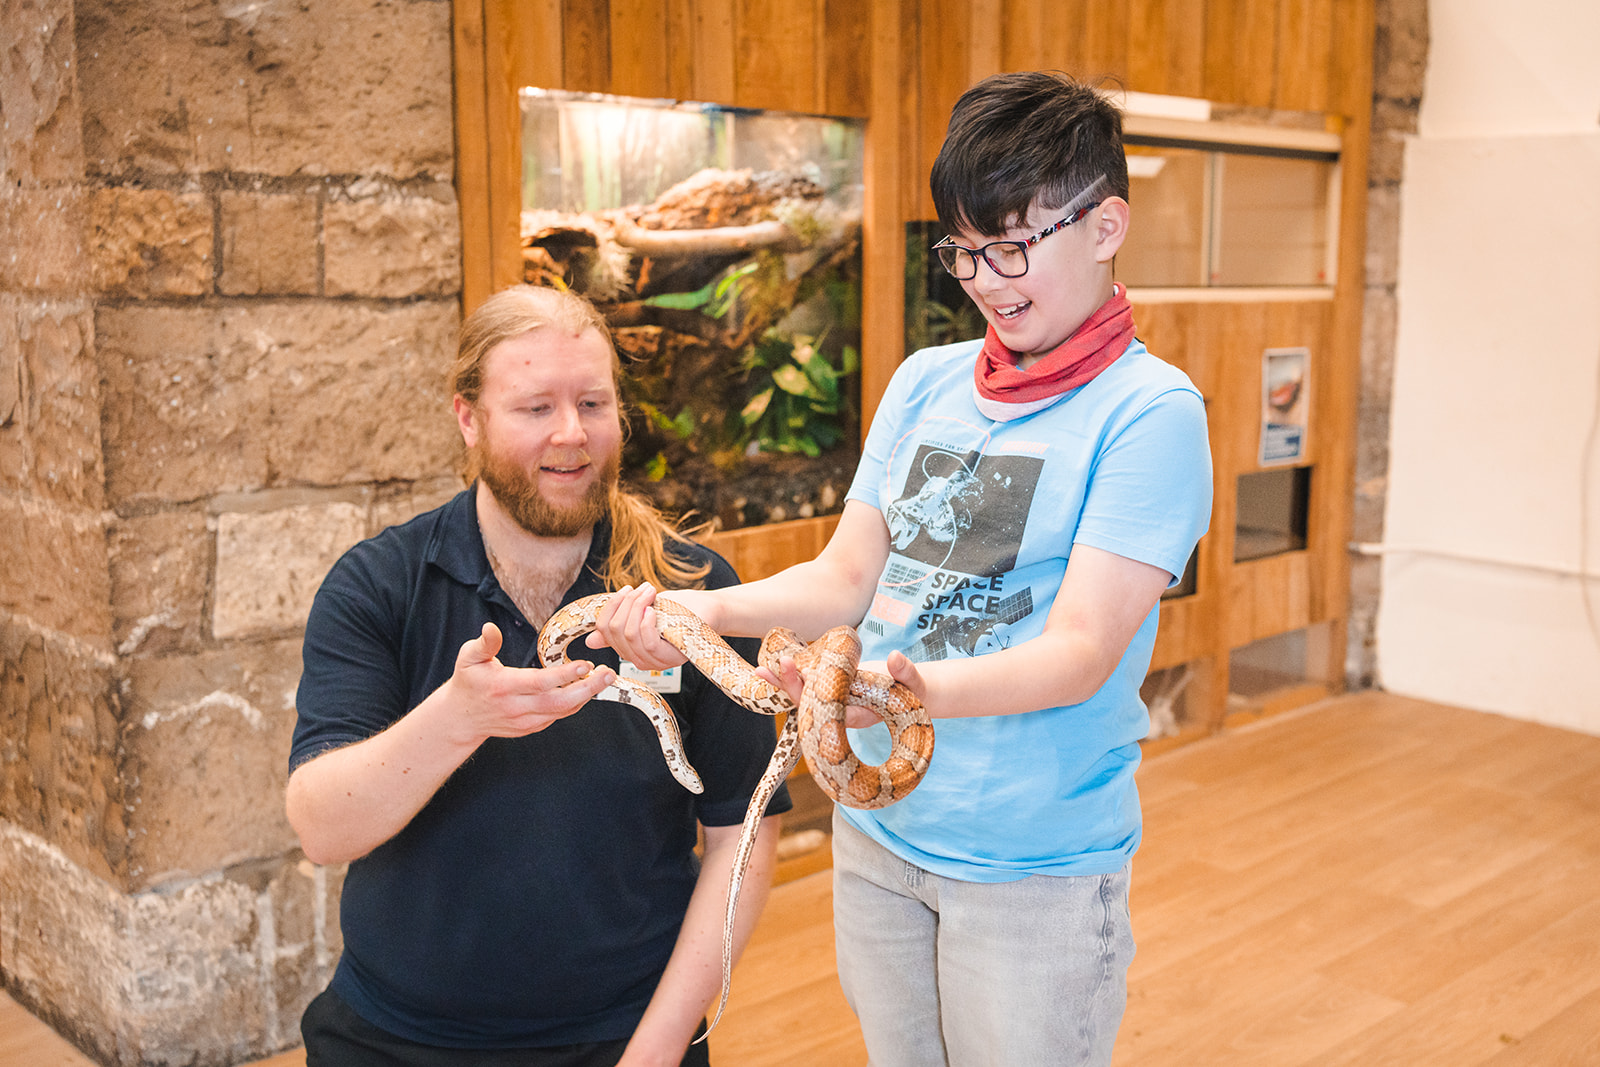 keeper with child holding corn snake and smiling IMAGE: Rachel Hein 2024